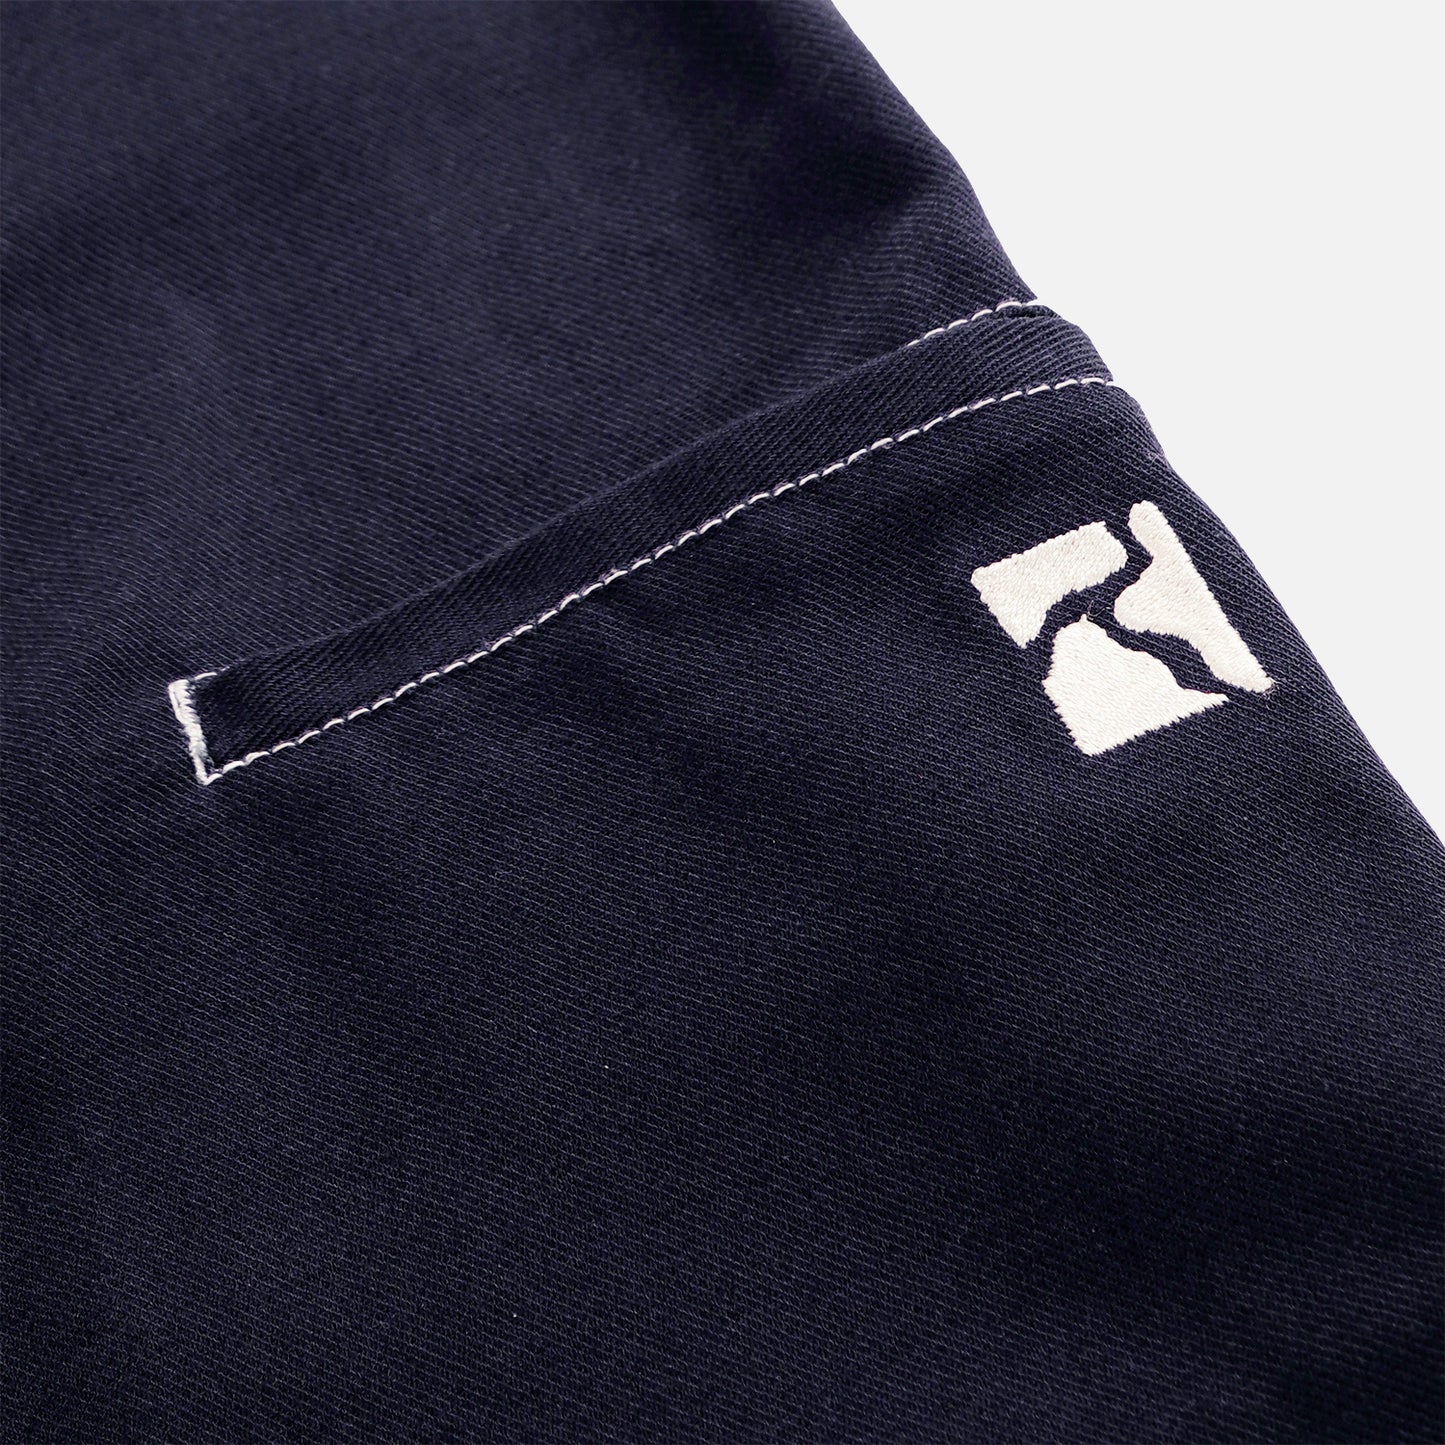 POETIC COLLECTIVE - PAINTER PANTS - NAVY/WHITE SEAMS